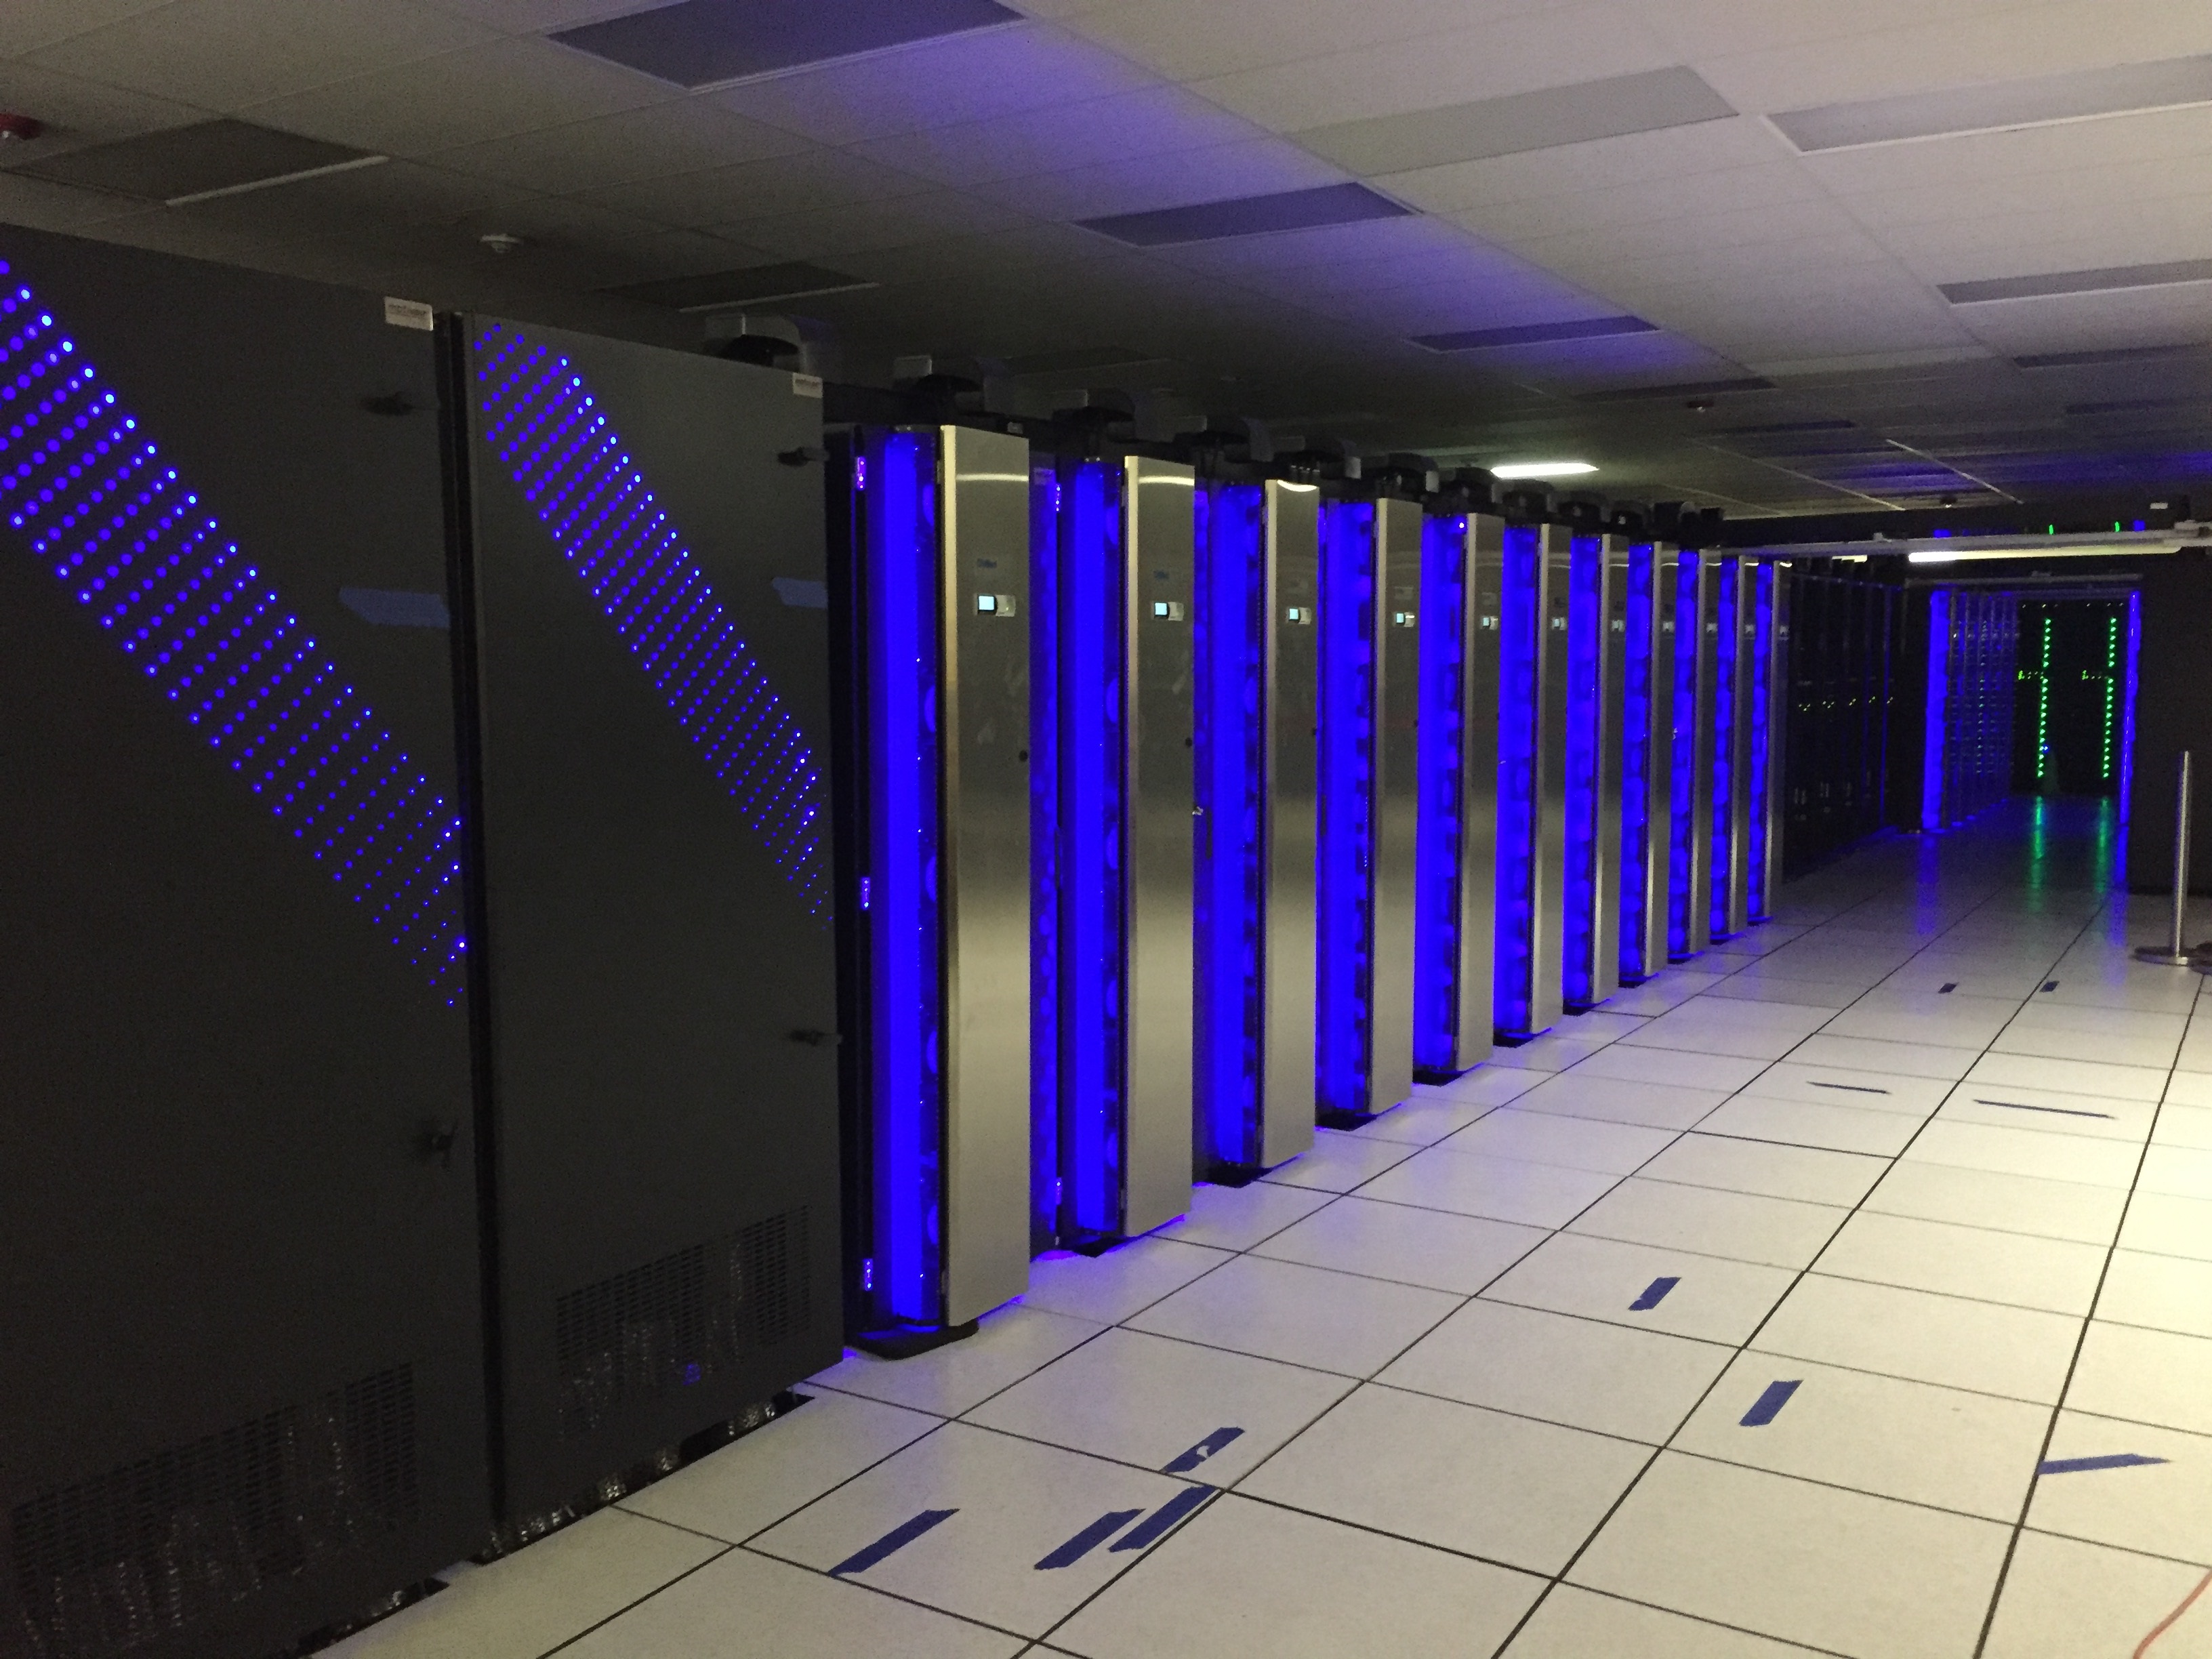 A photograph of rows of black and blue servers in an empty hallway.